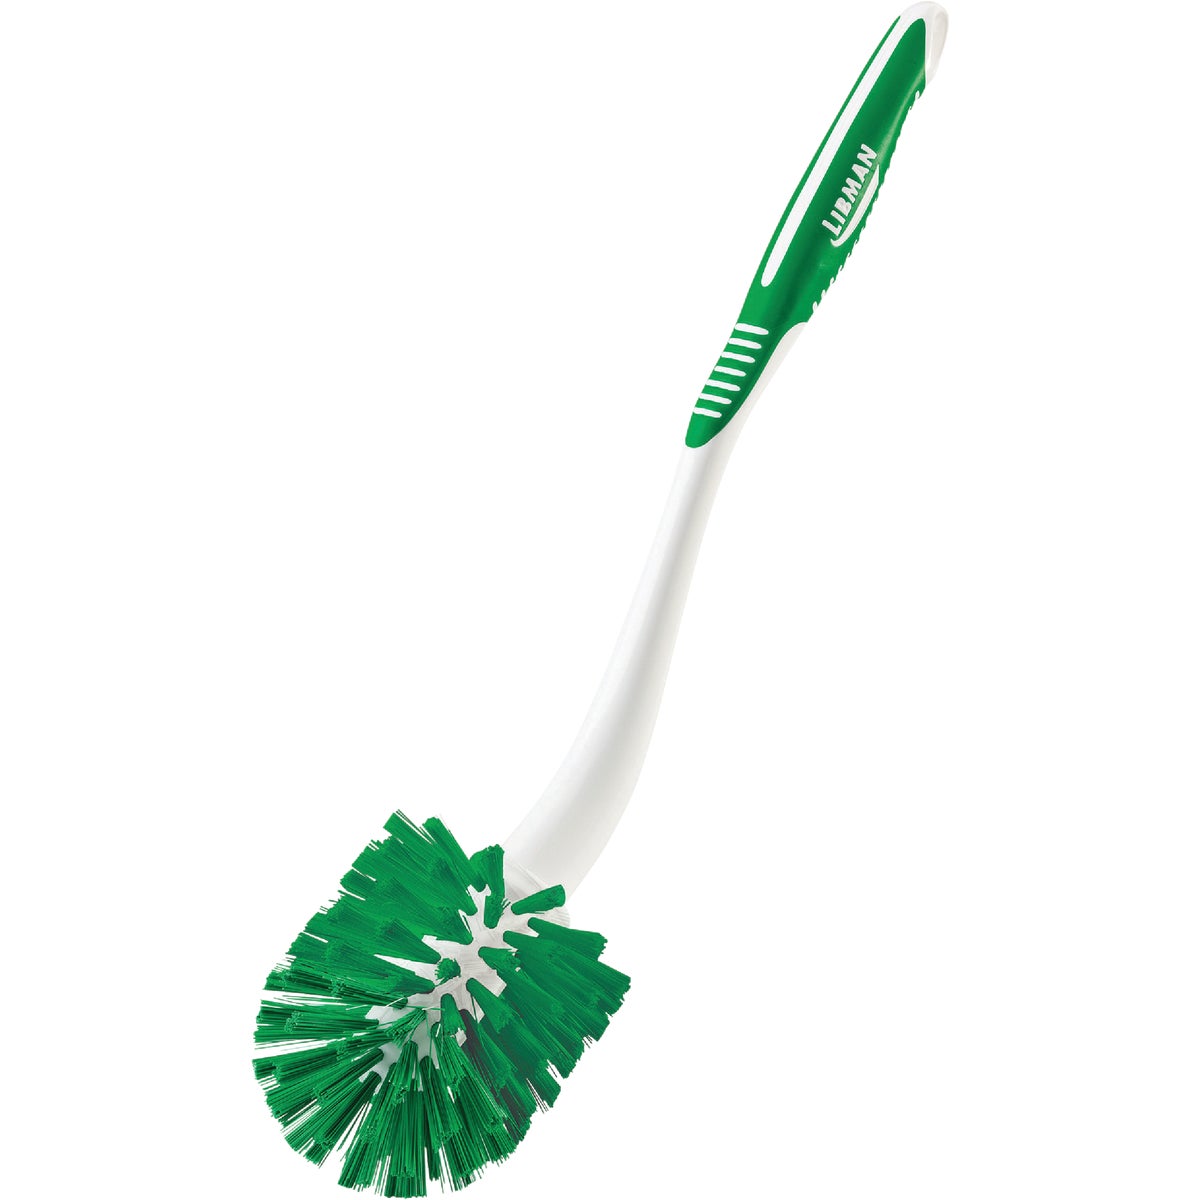 Item 602059, Angled toilet bowl brush to easily reach under the lip of the toilet for a 